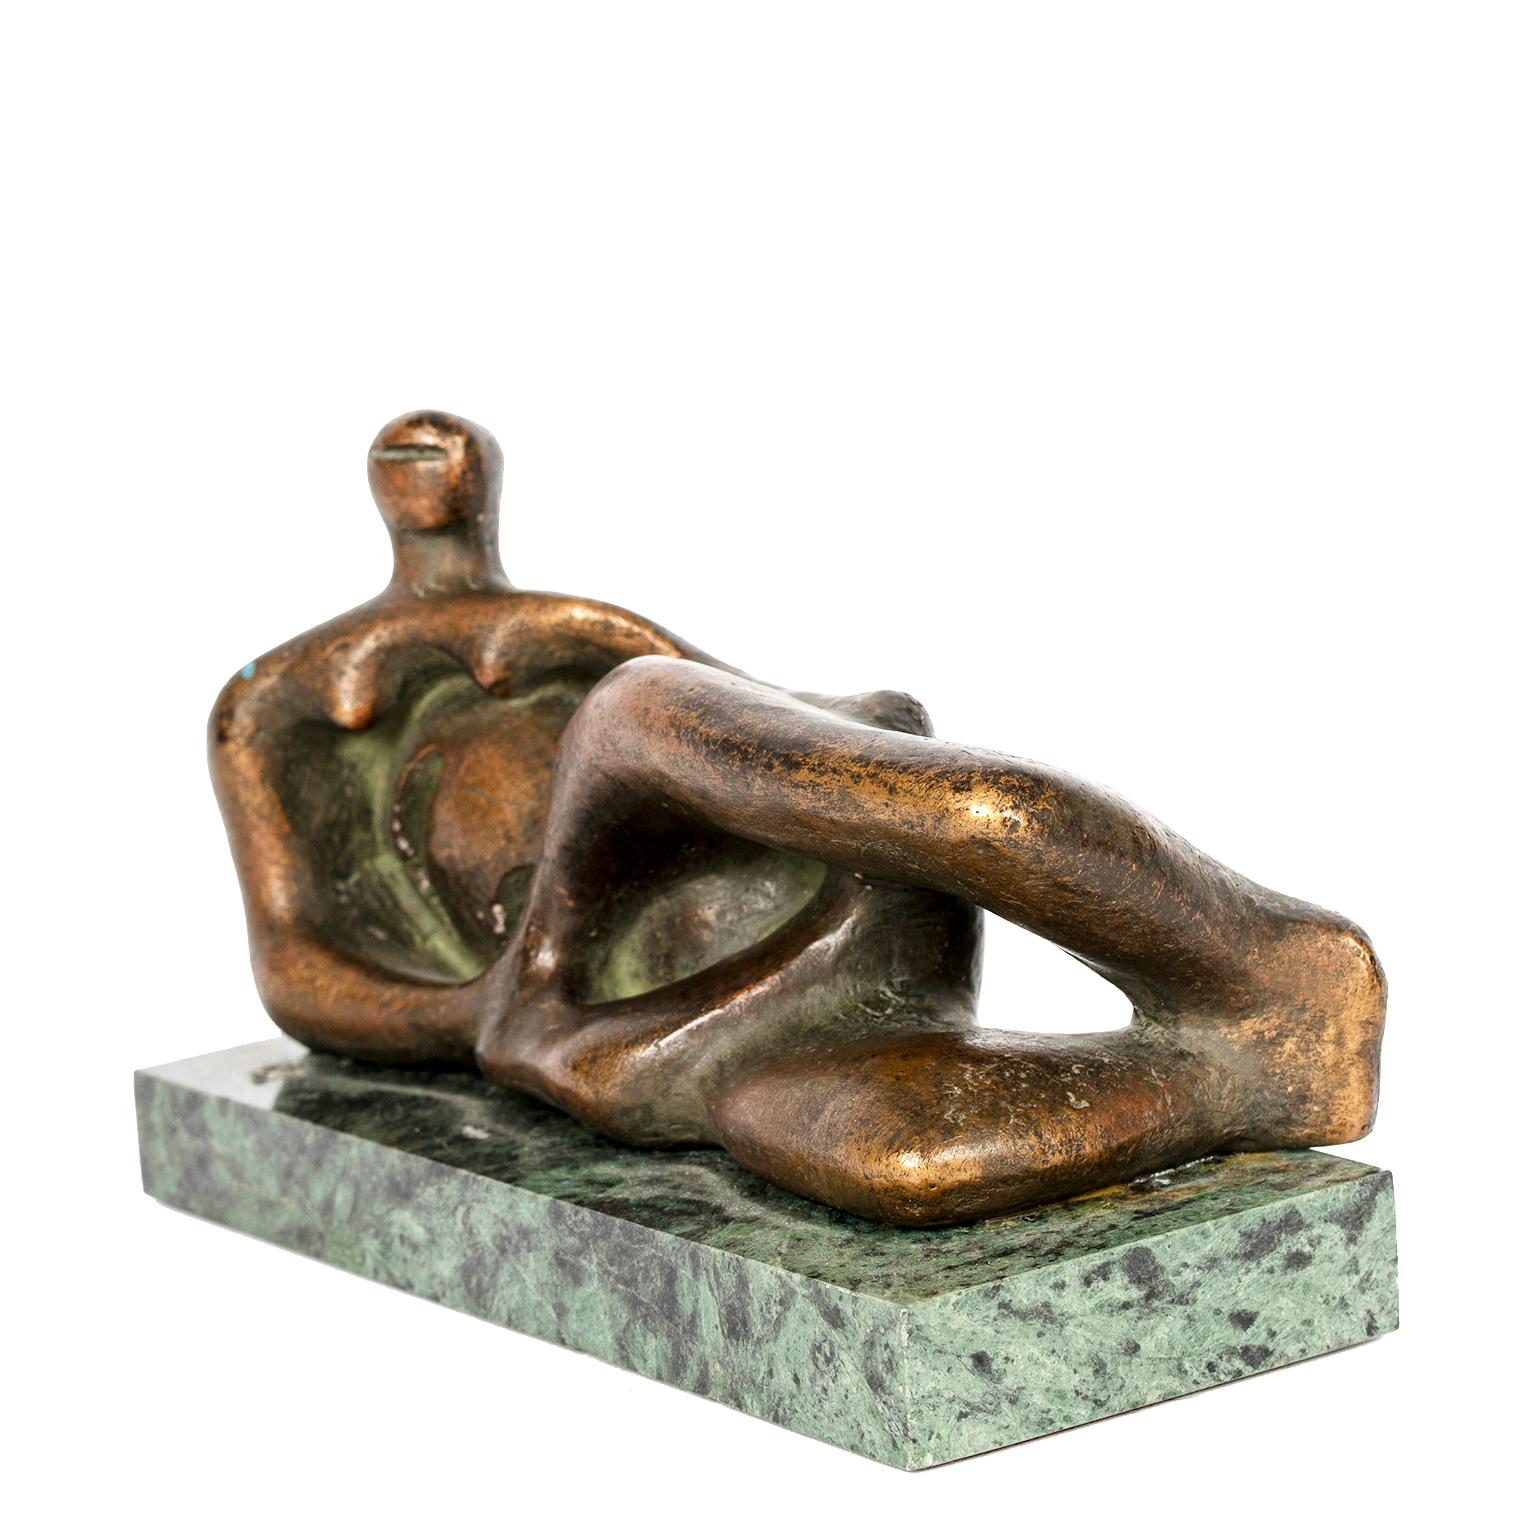 Molded Reclining Female Figure Reproduction After Henry Moore, circa 1971